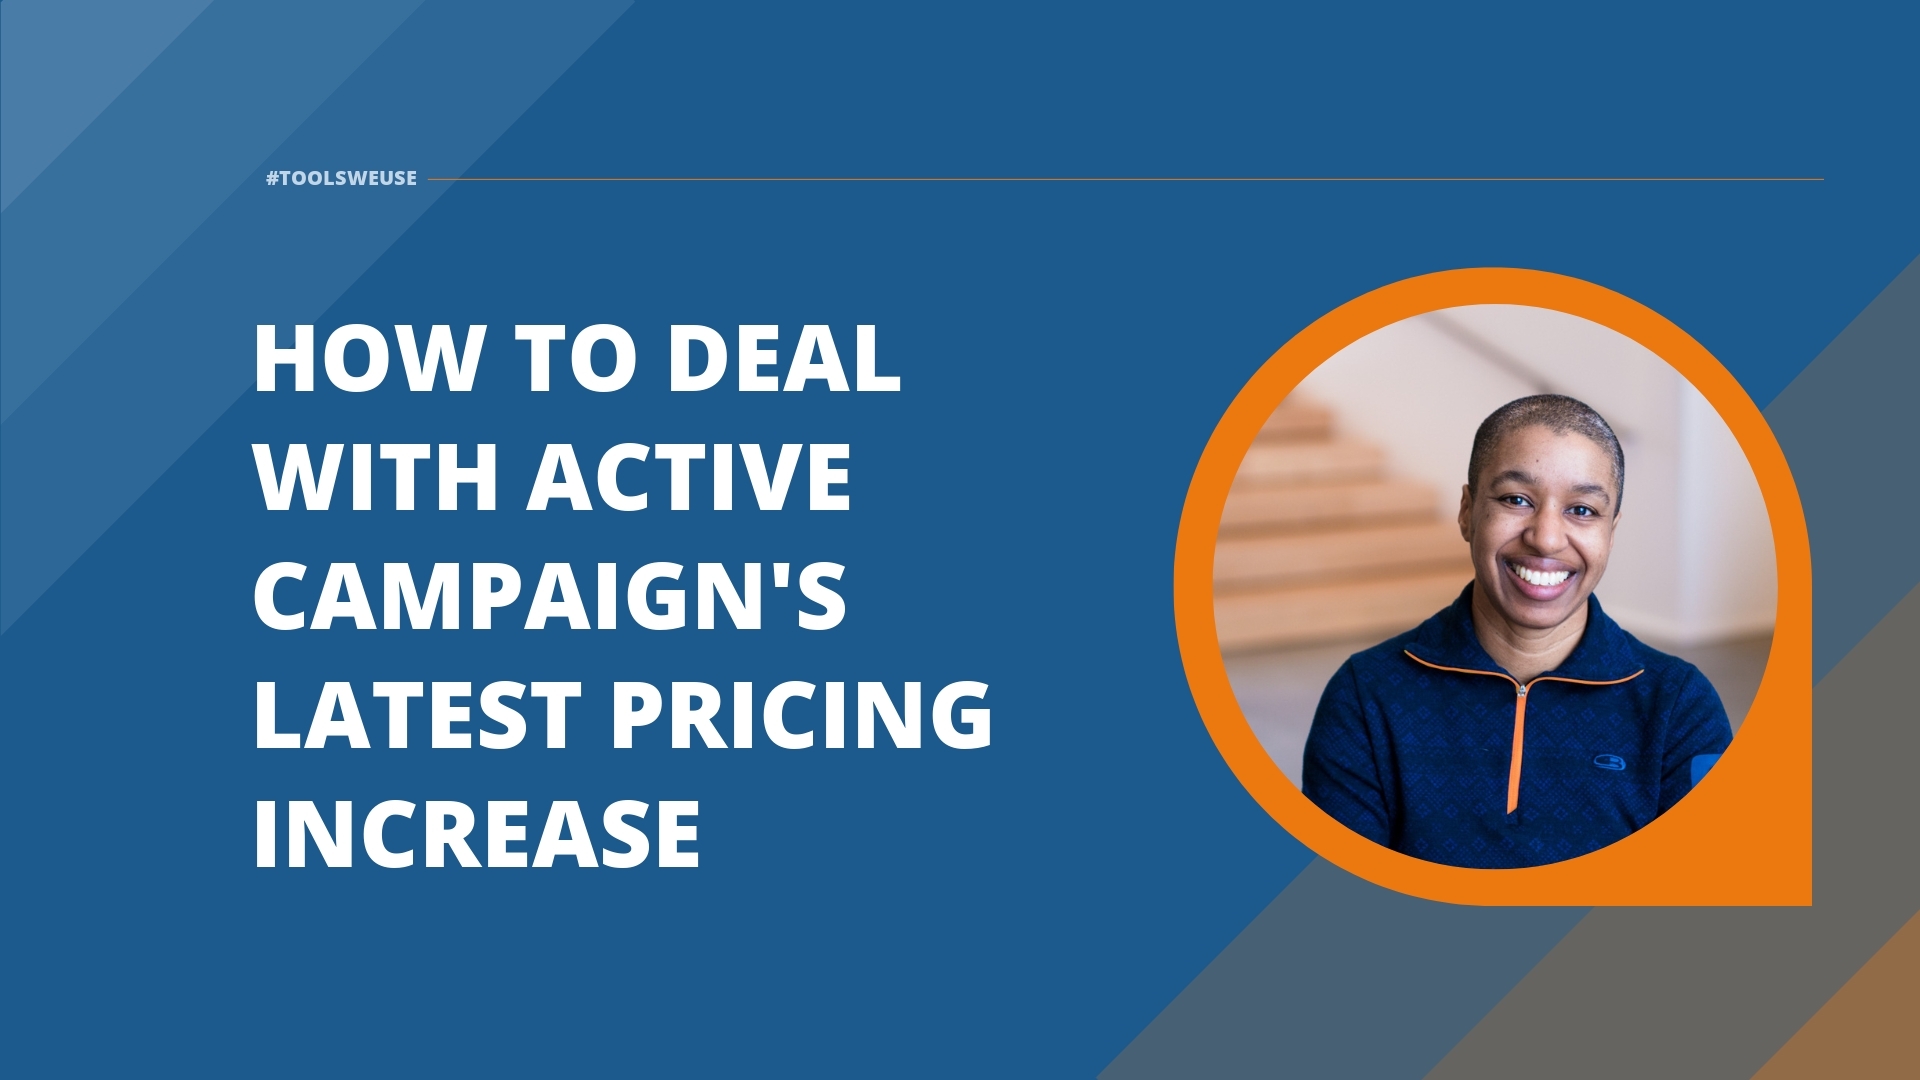 How to Deal with Active Campaign's Latest Pricing Increase